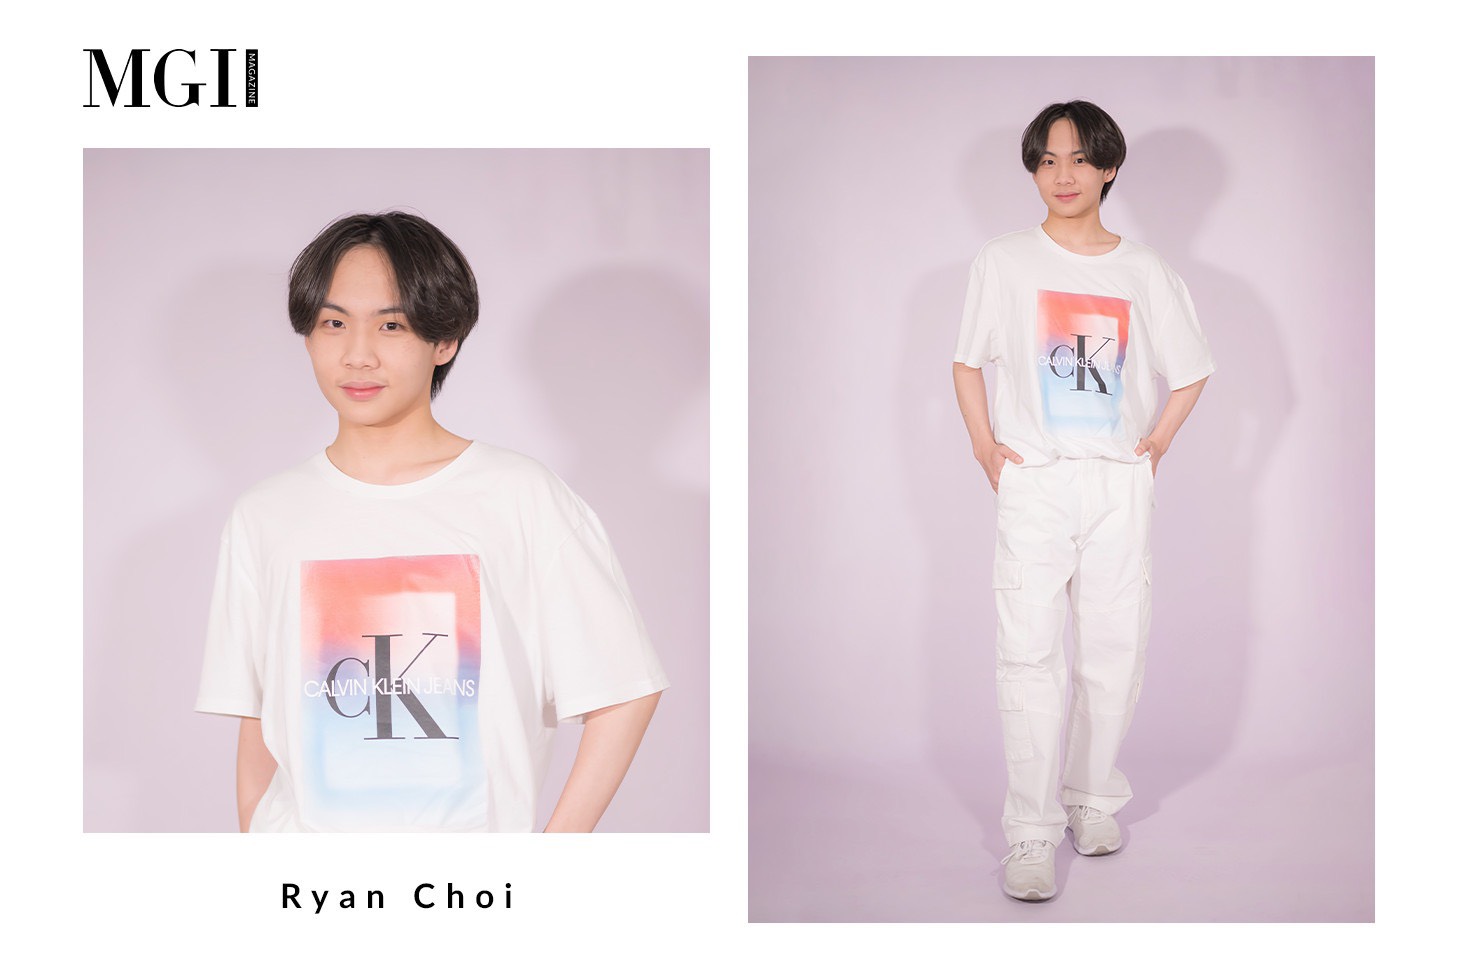 Ryan Choi – A special charm on the runways